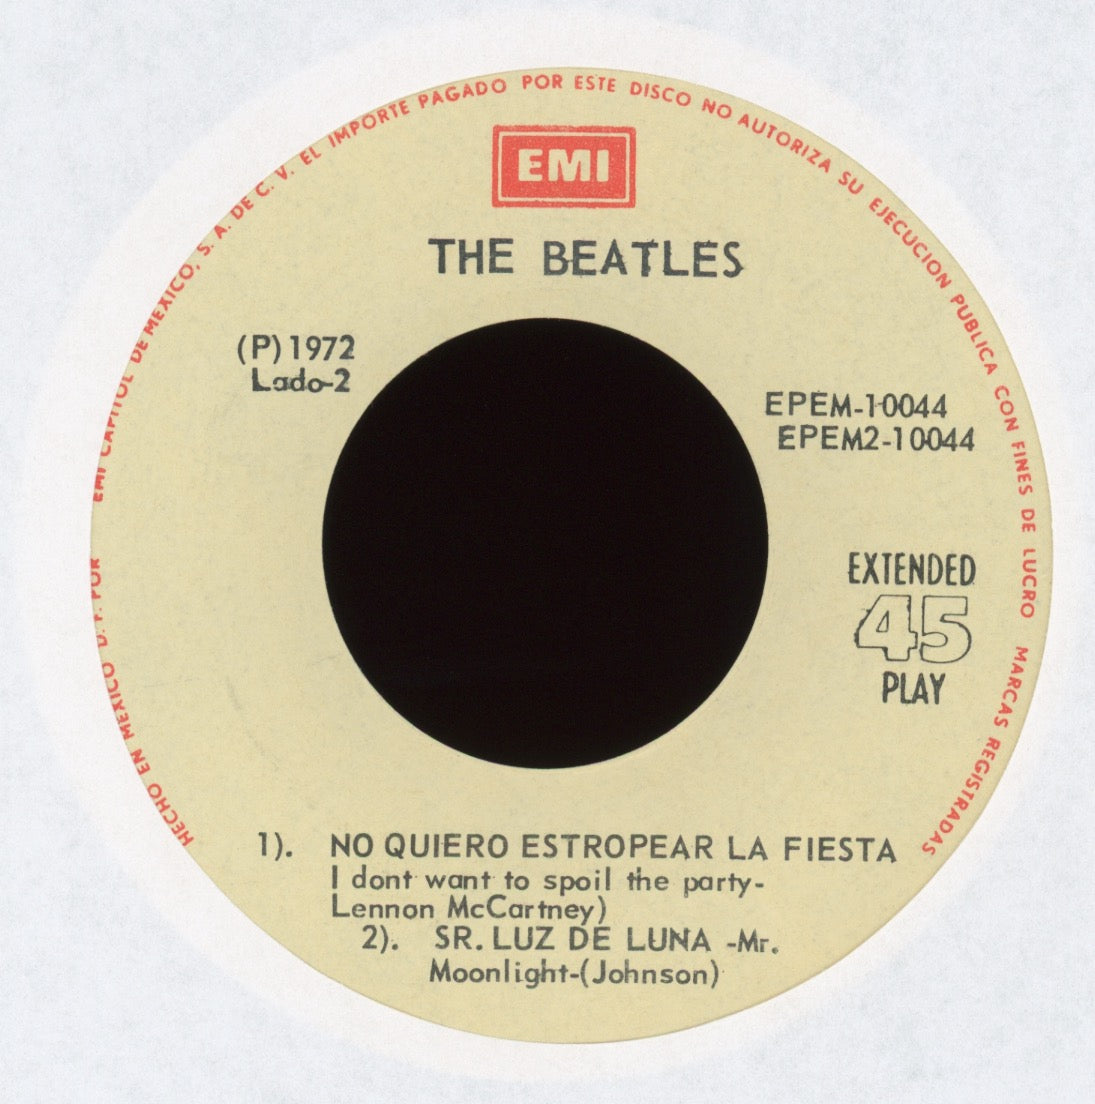 The Beatles - Musica De Rock on EMI EPEM-10044 Mexican Pressing With Picture Sleeve